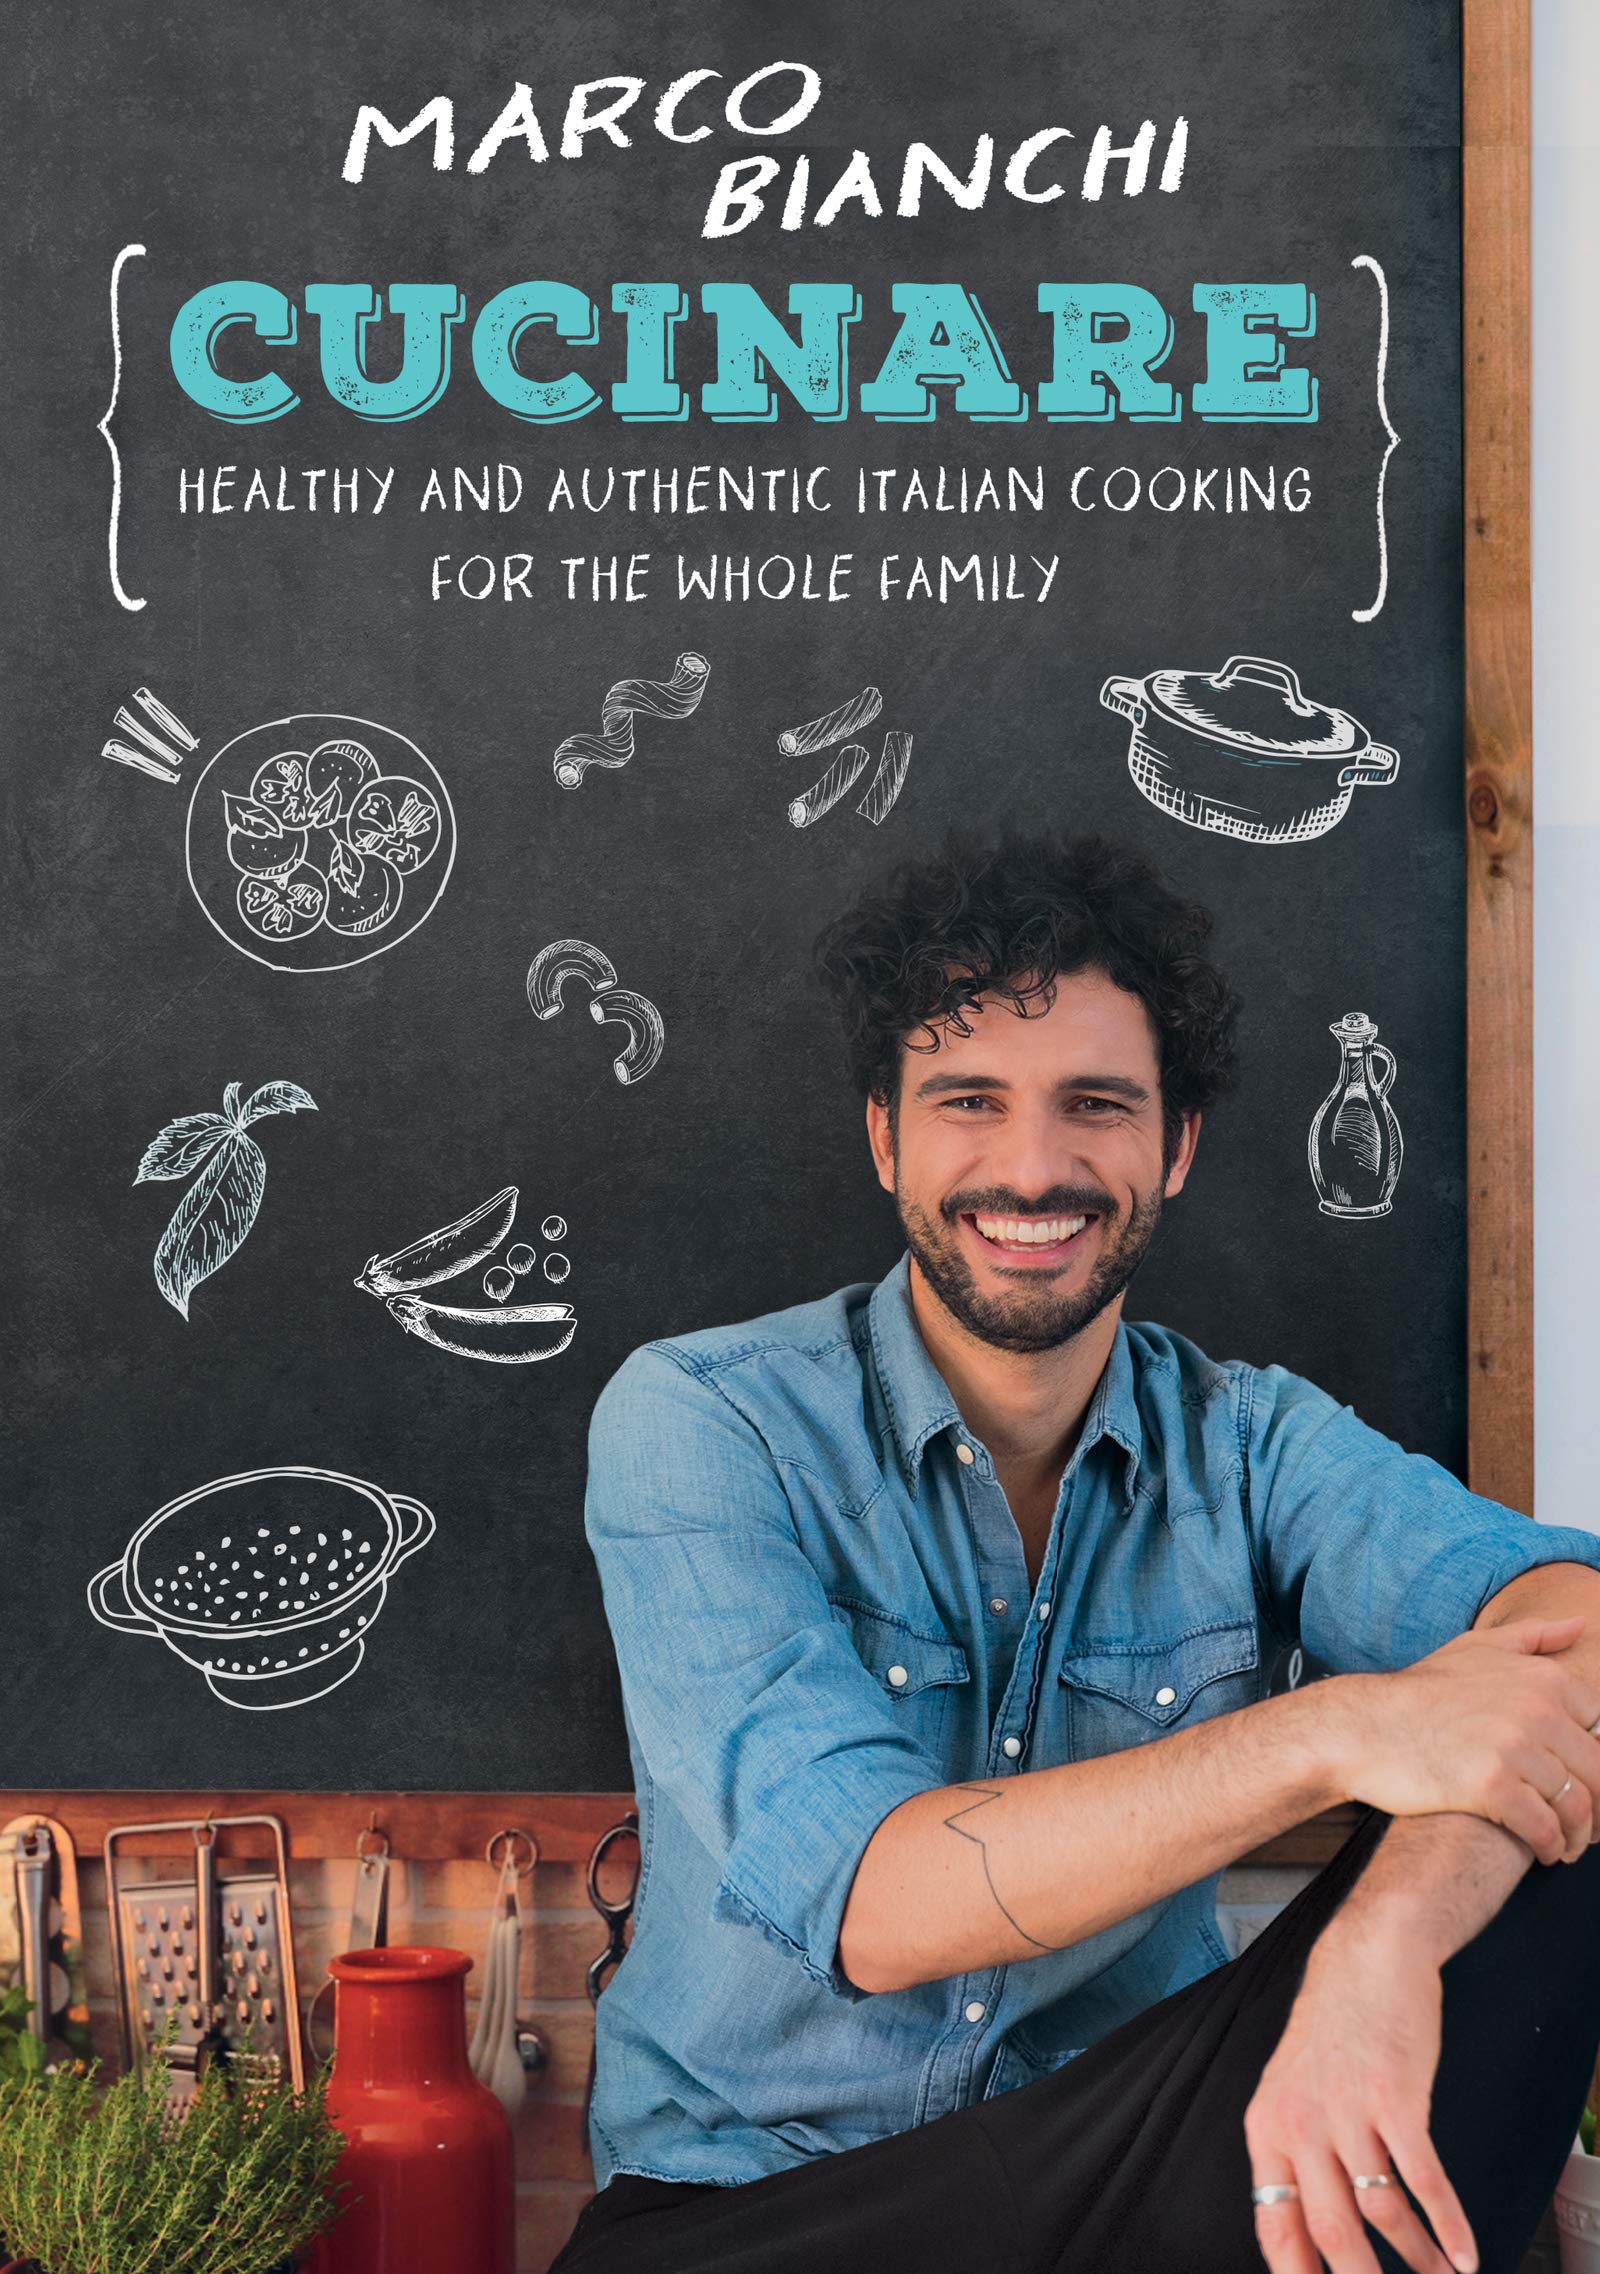 Cucinare: Healthy and Authentic Italian Cooking for The Whole family Author Marco Bianchi LIB-098